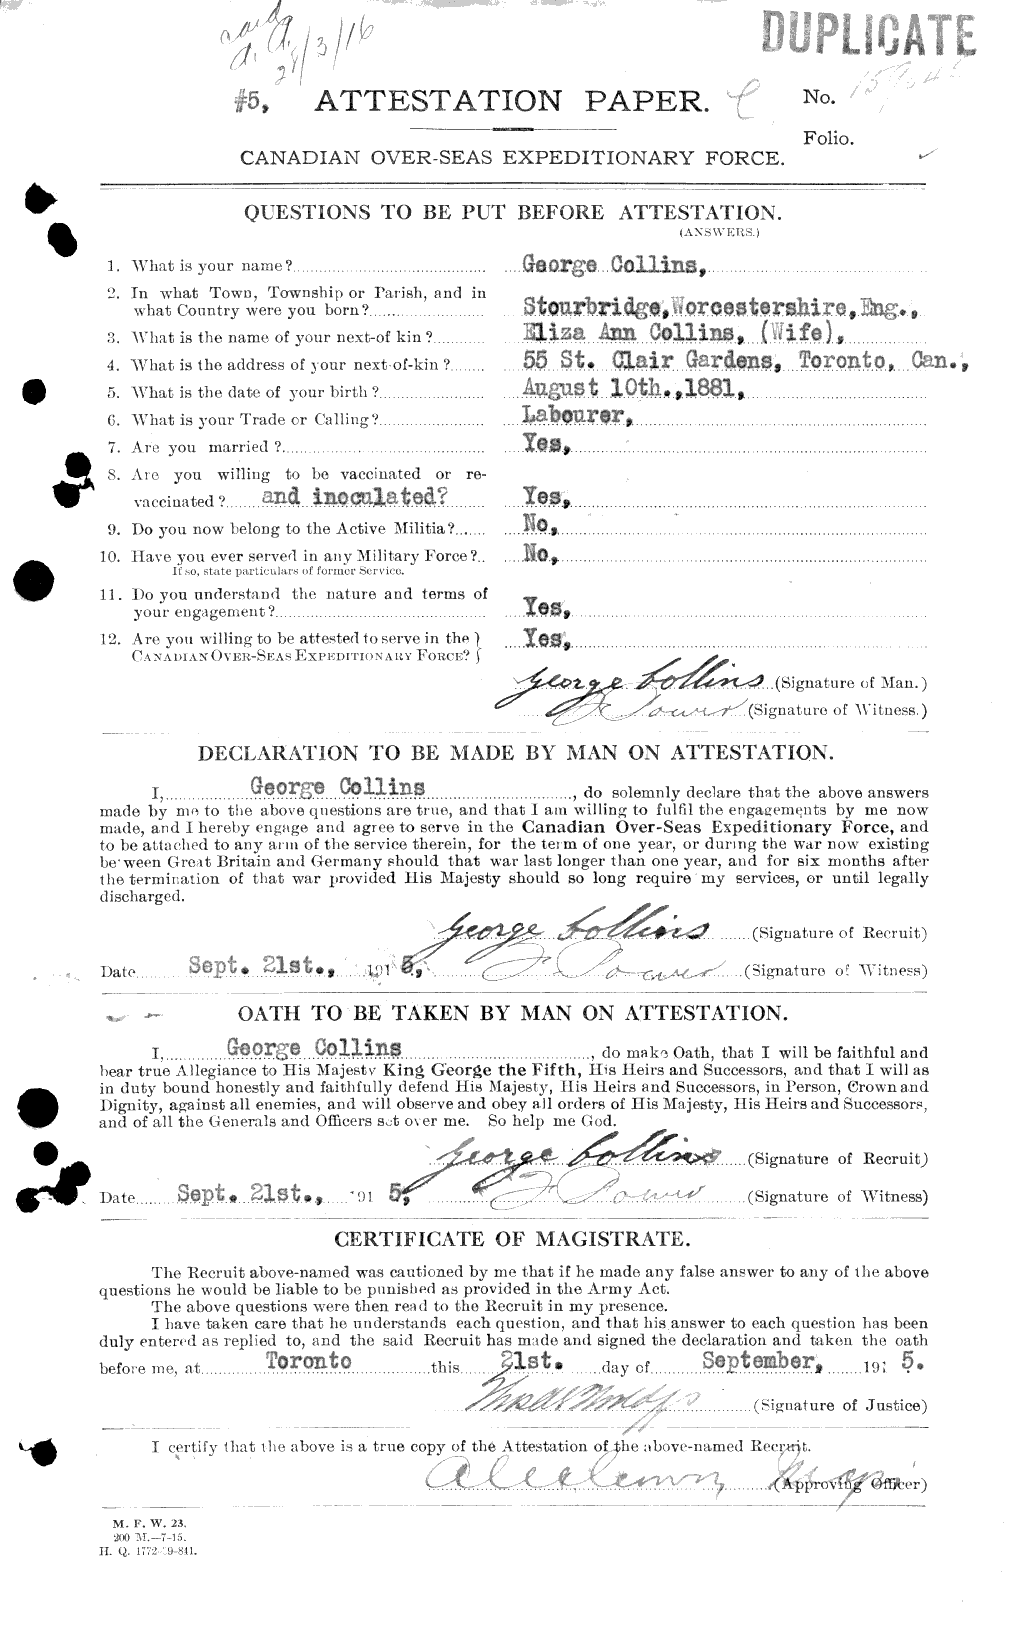 Personnel Records of the First World War - CEF 037846a